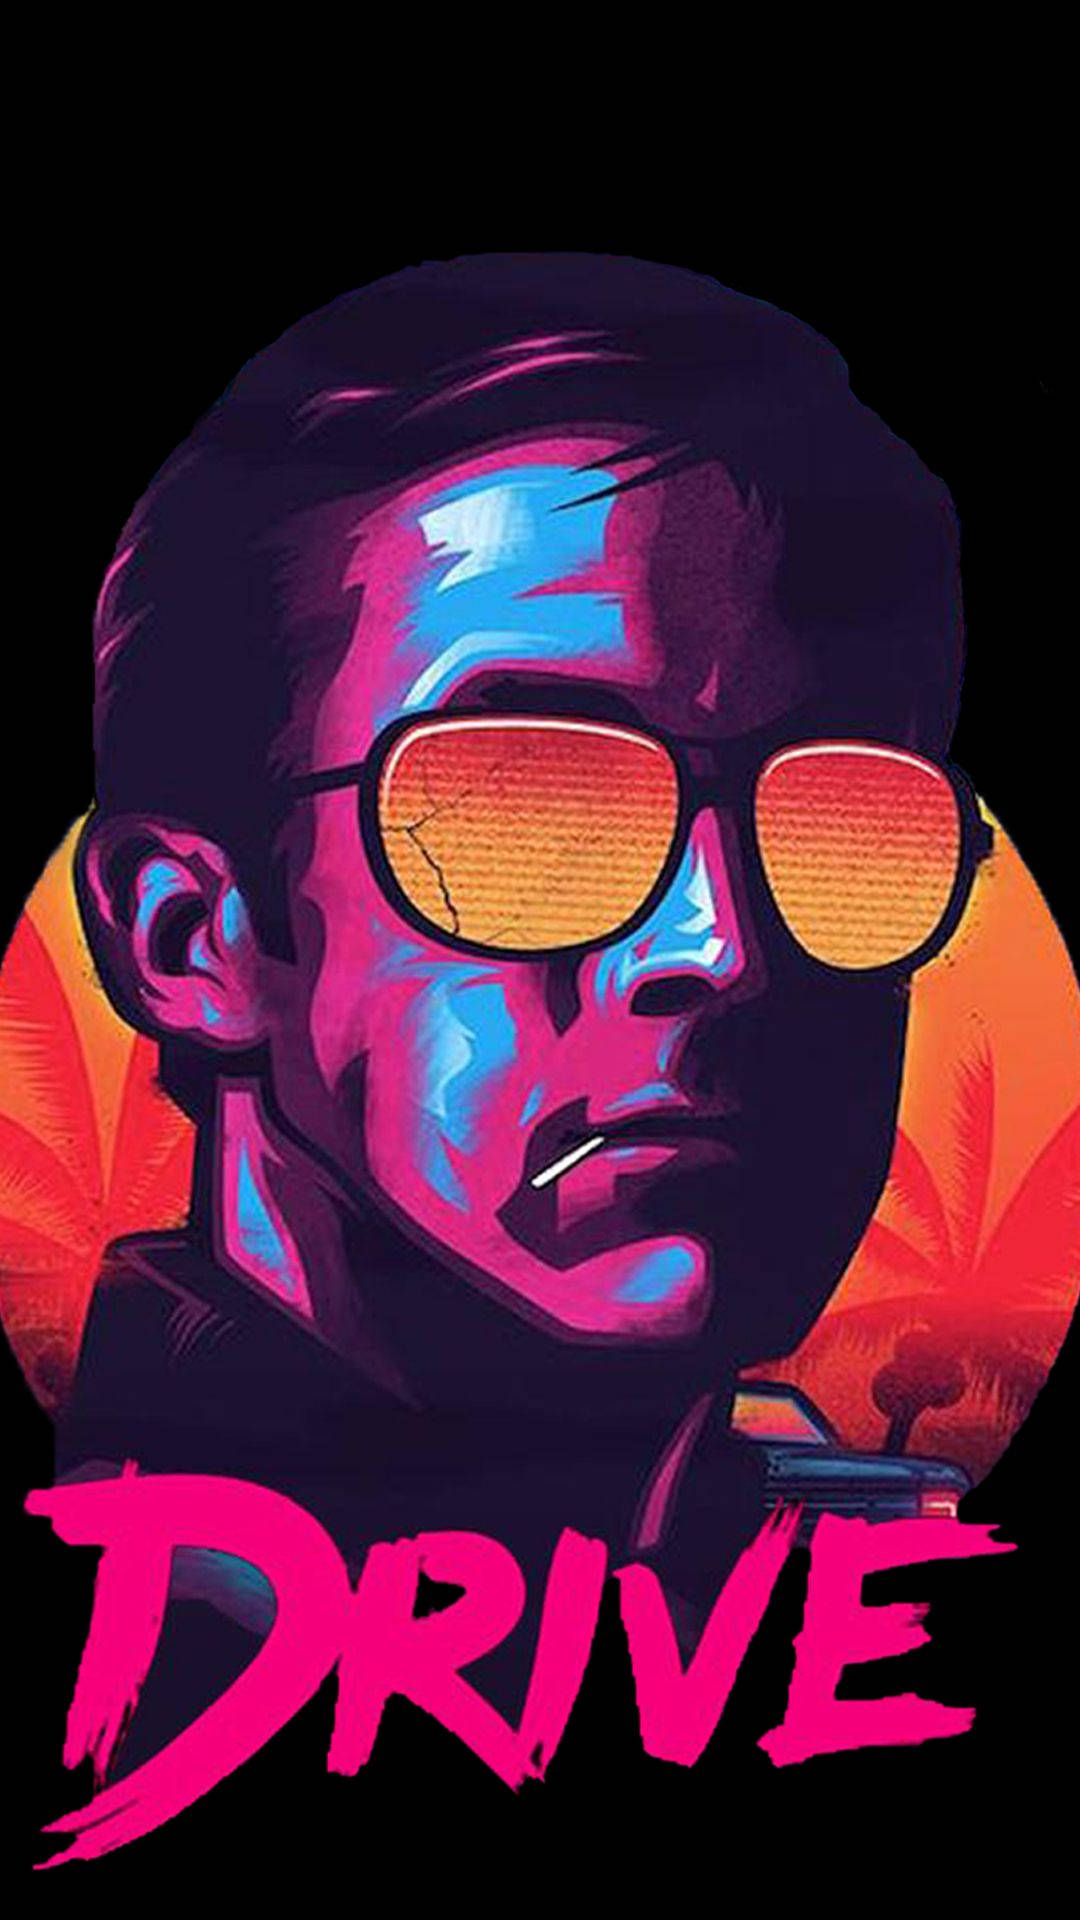 Drive Movie 80s Themed Cover